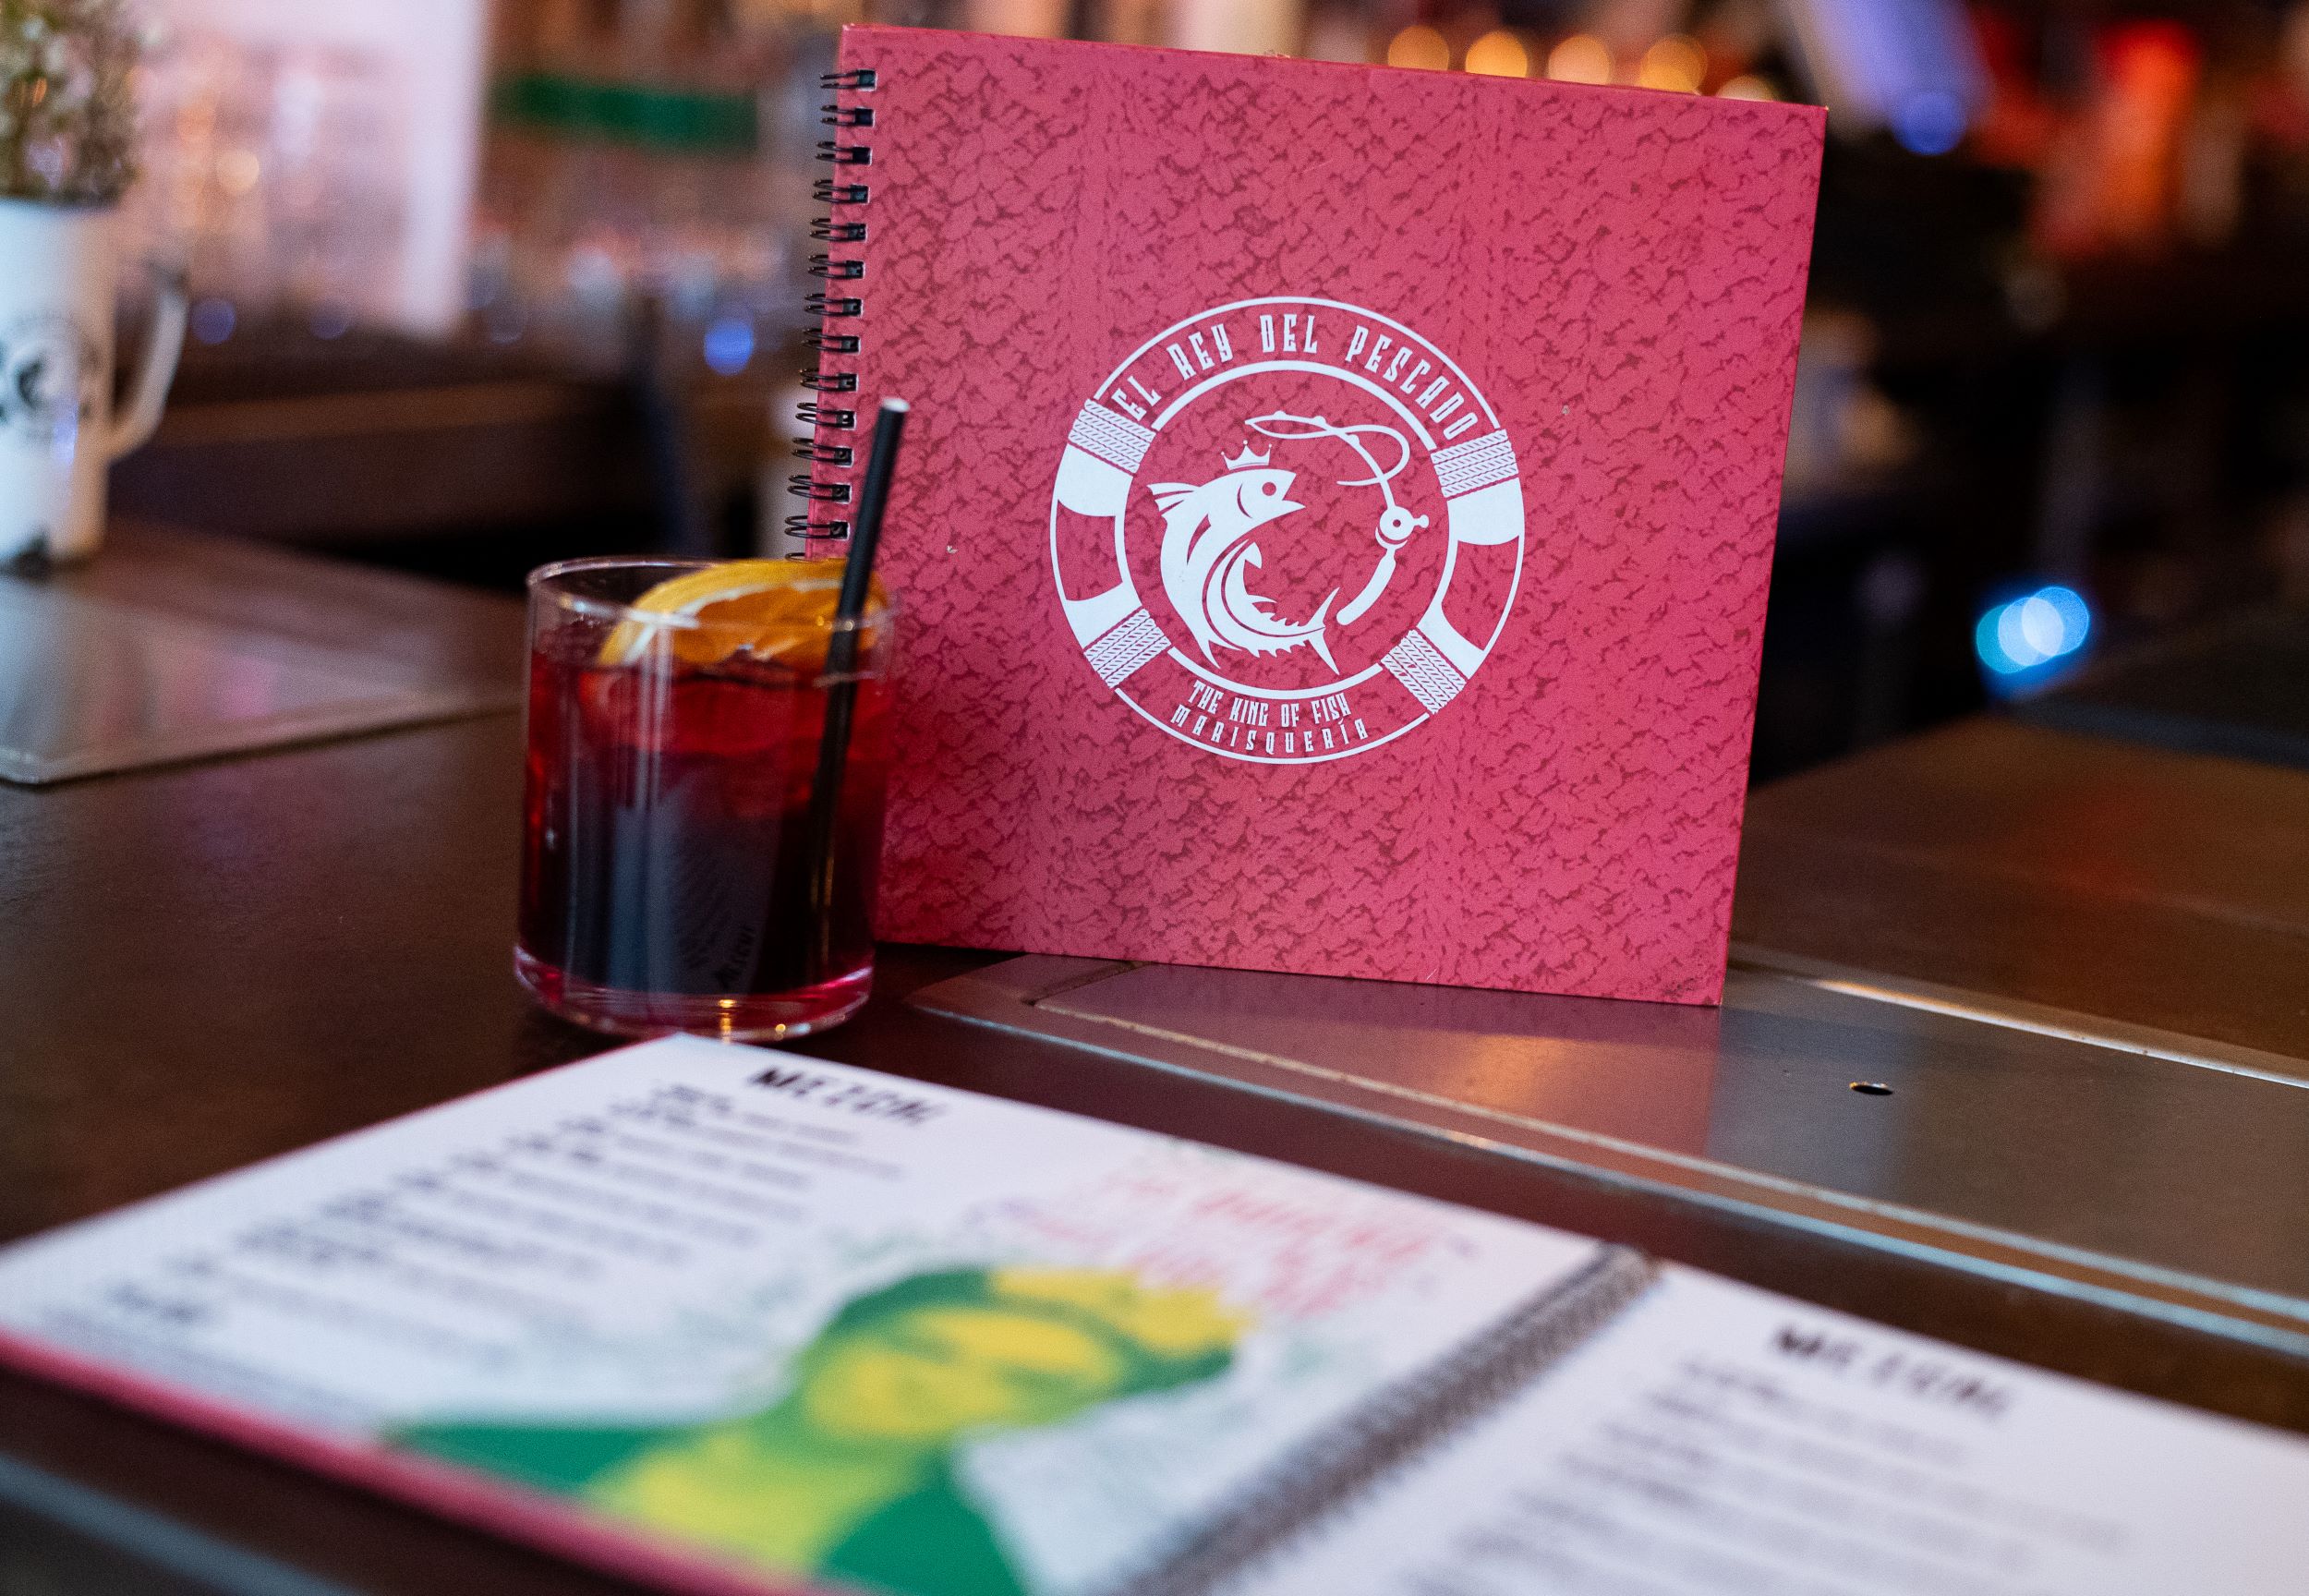 A menu from "le bar belge" standing on a bar table with a pink textured cover featuring a white emblem, next to a dark beverage in a small glass.